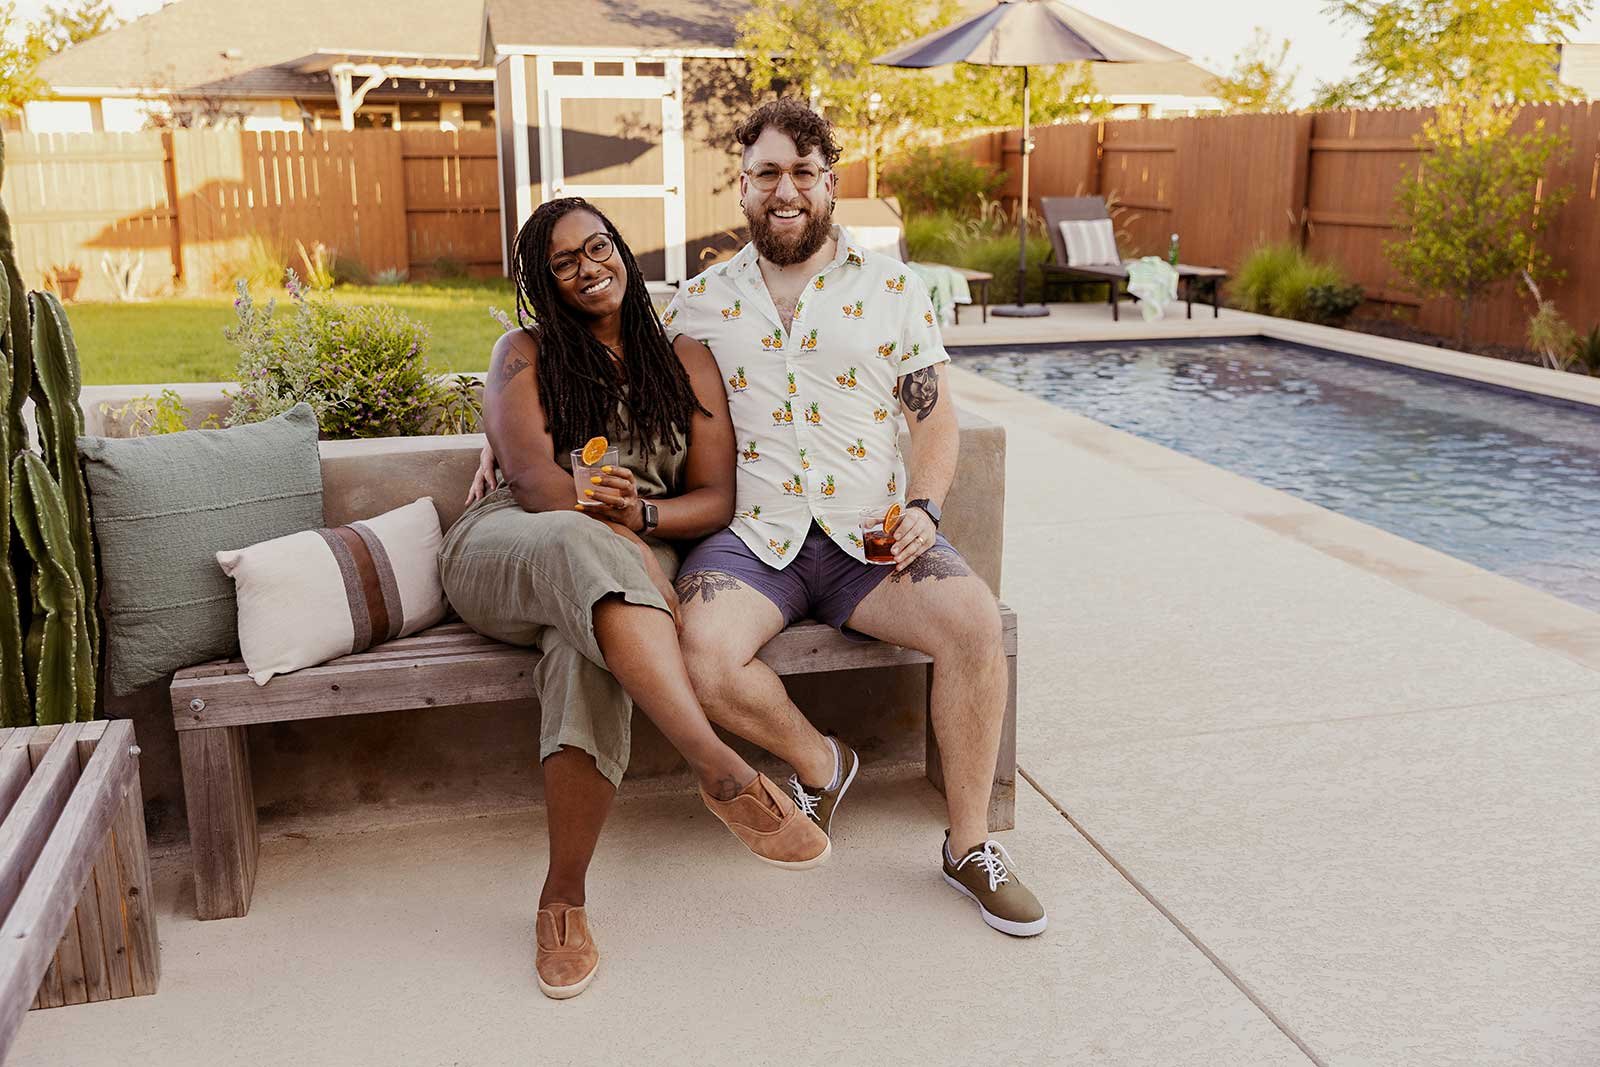 Stacey and Sean Matthew enjoying their new backyard landscape, where a new concrete planter doubles as a seatback for a rustic modern bench.